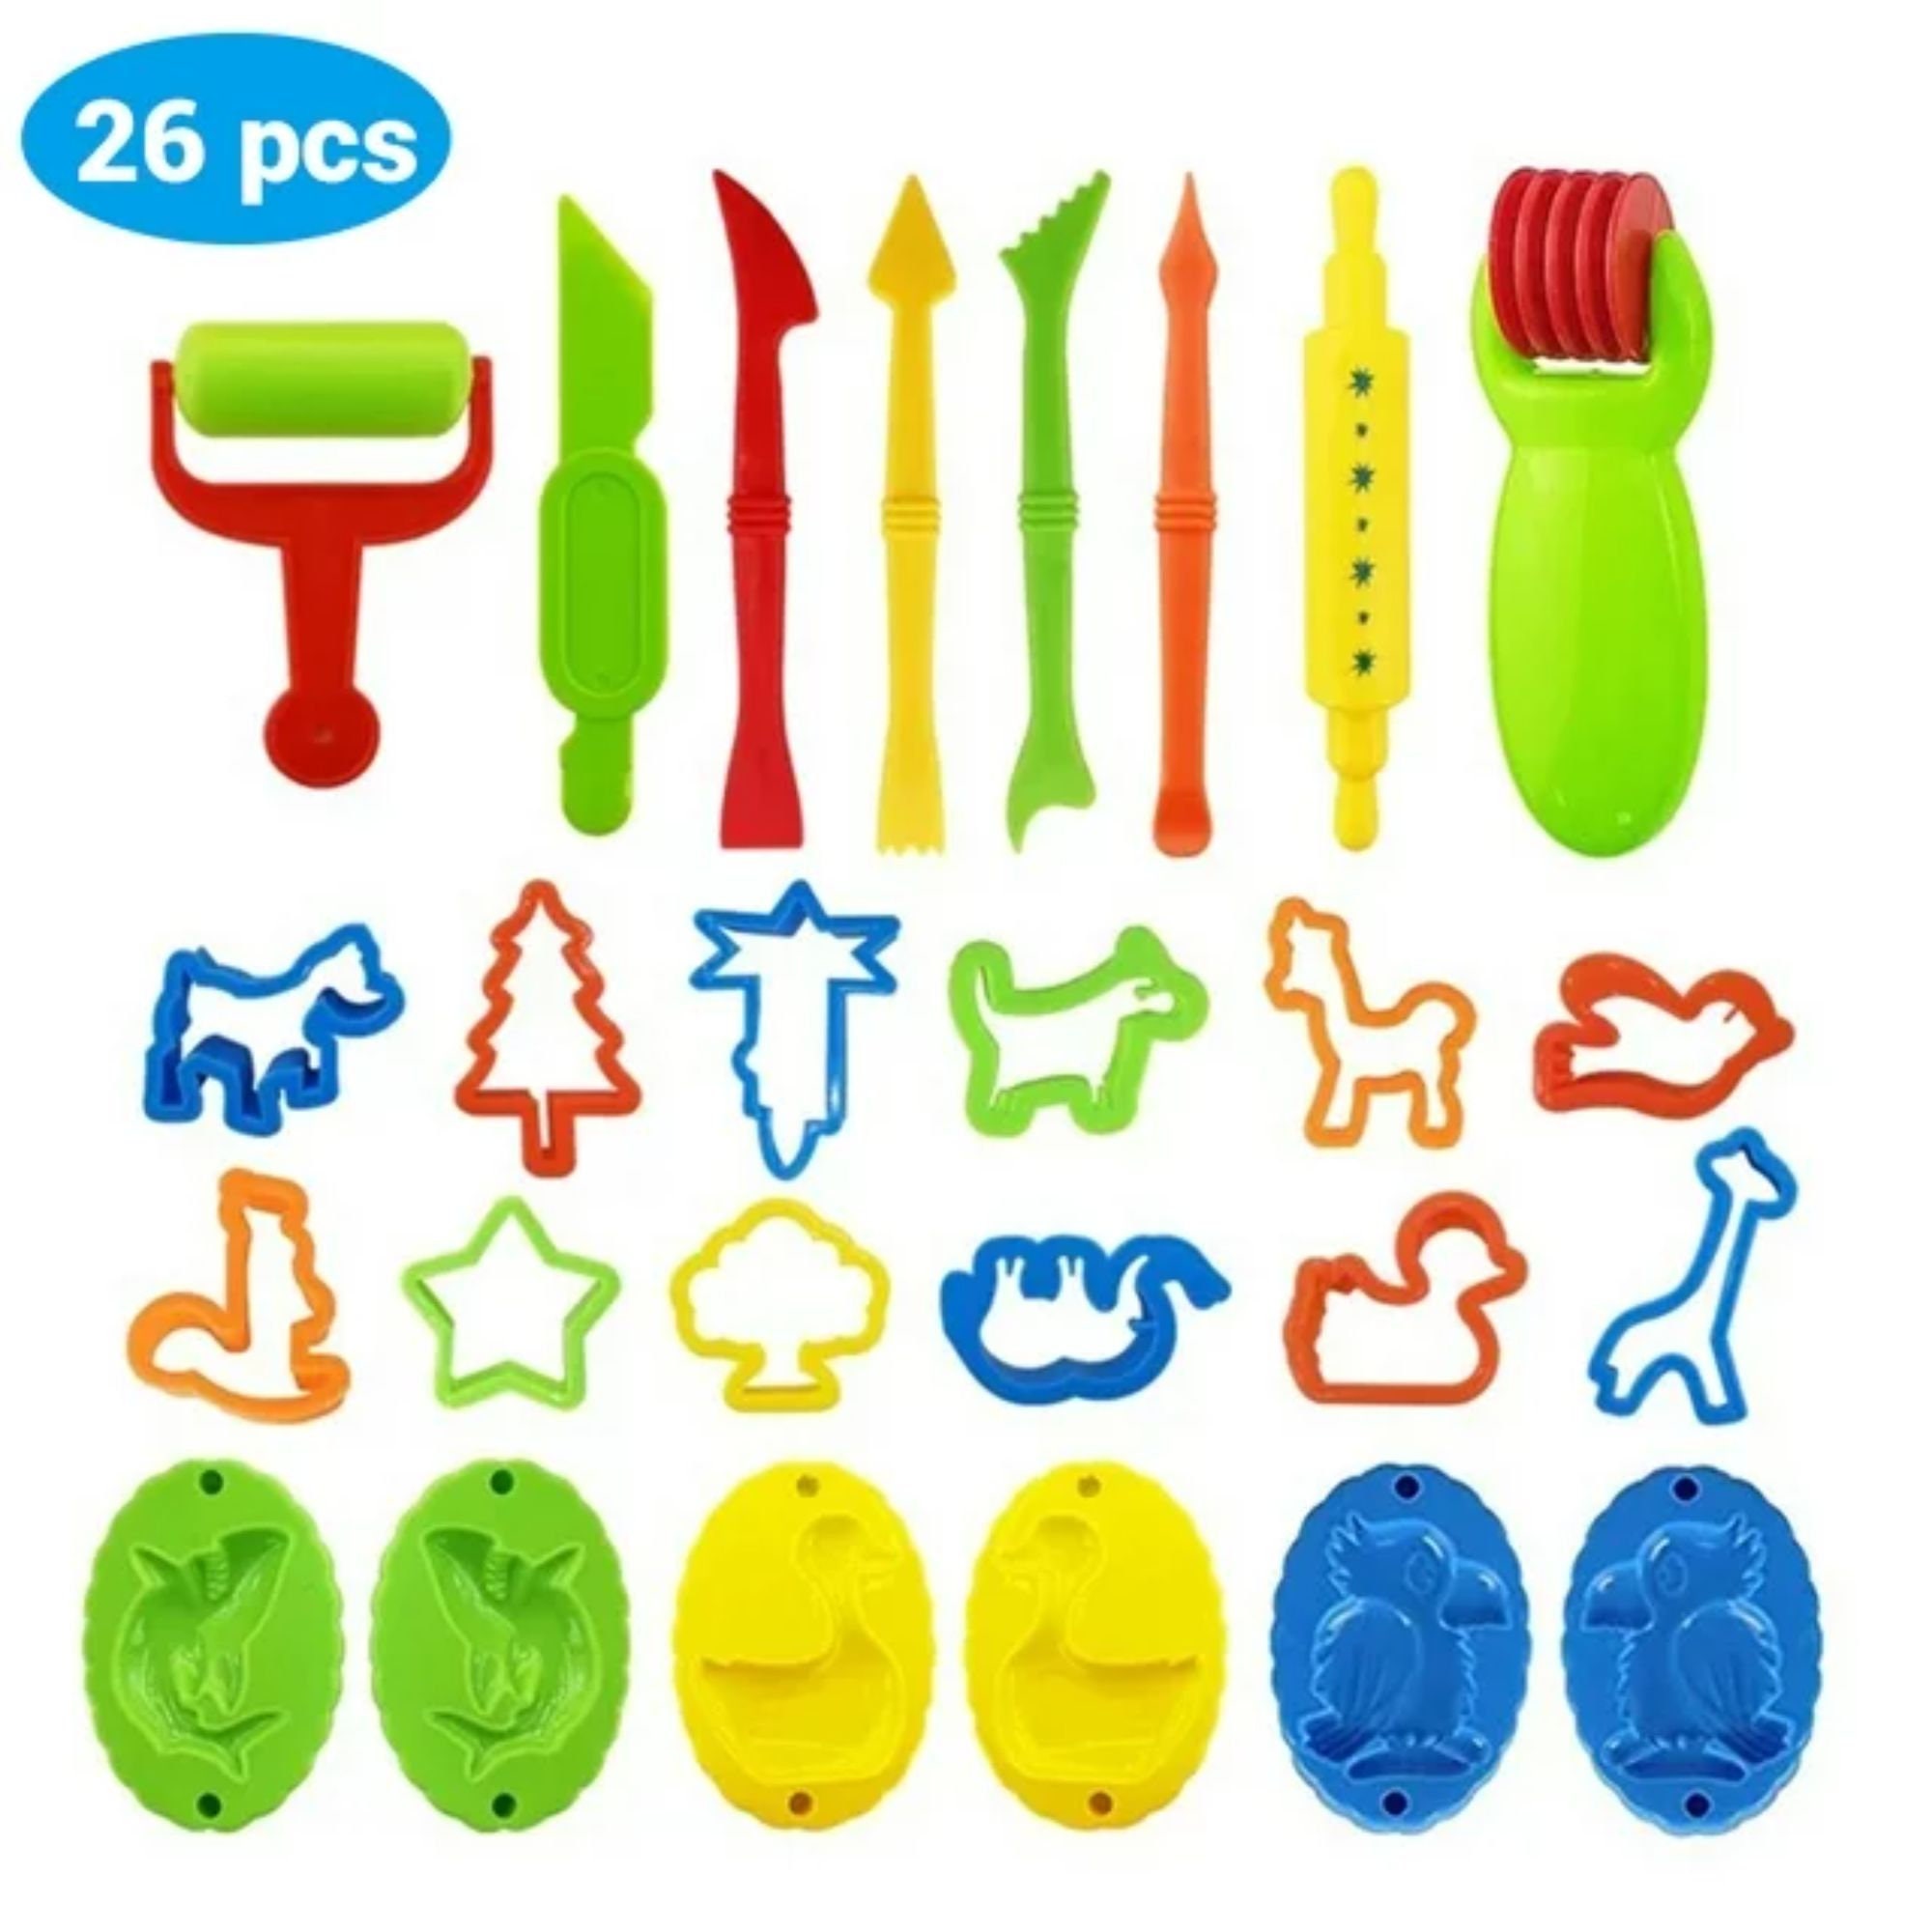 Polymer Clay Dinosaur Figures DIY Kit for Kids Sculpting Craft Kit  Sculpting Tools Modeling Clay Tools 